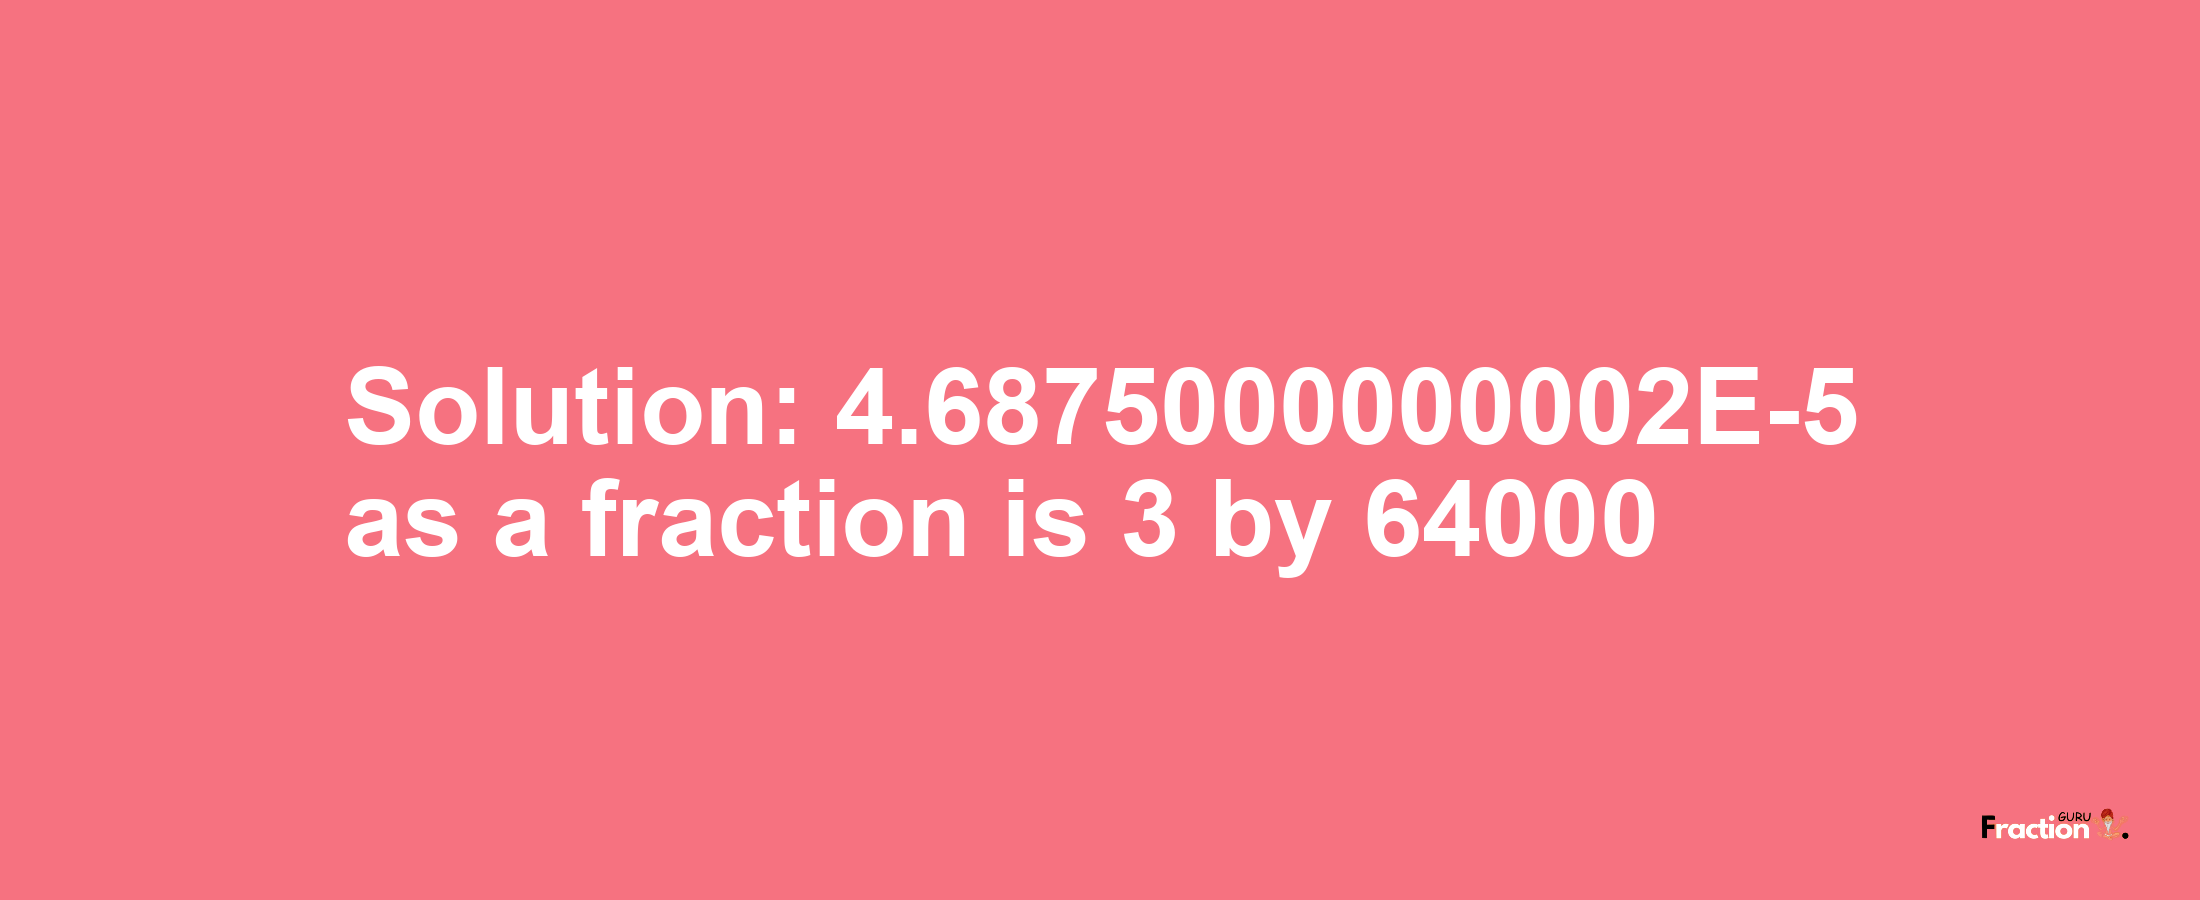 Solution:4.6875000000002E-5 as a fraction is 3/64000